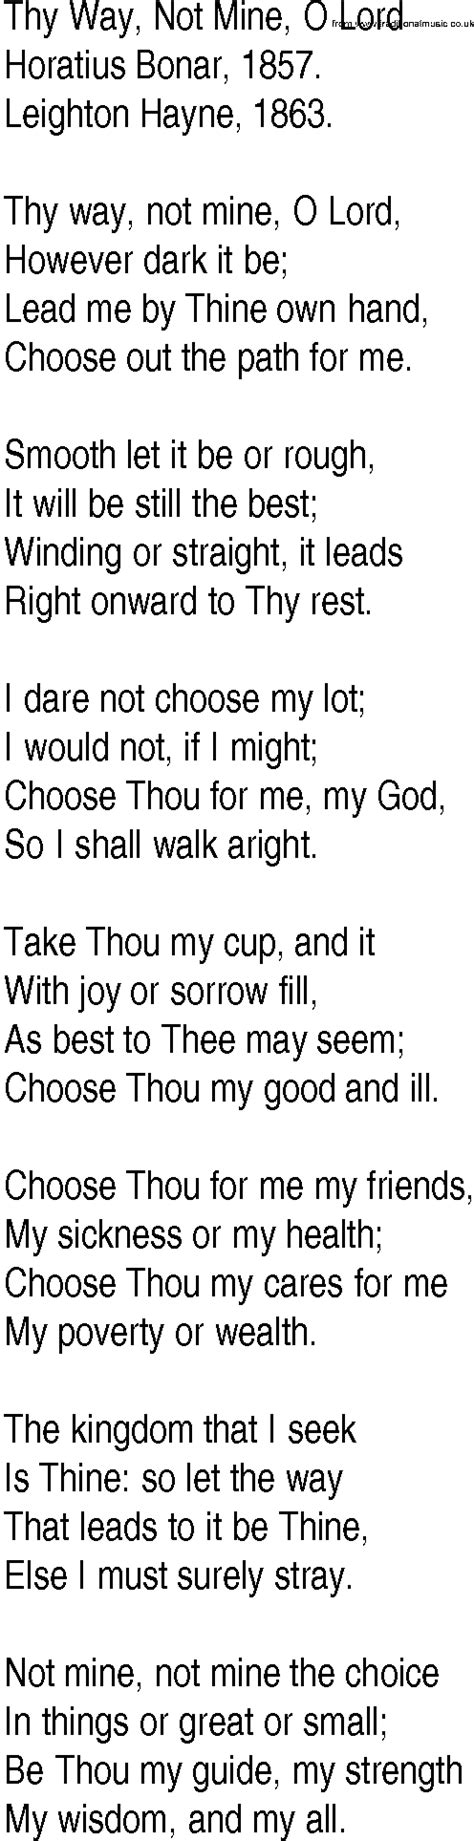 Hymn And Gospel Song Lyrics For Thy Way Not Mine O Lord By Horatius Bonar